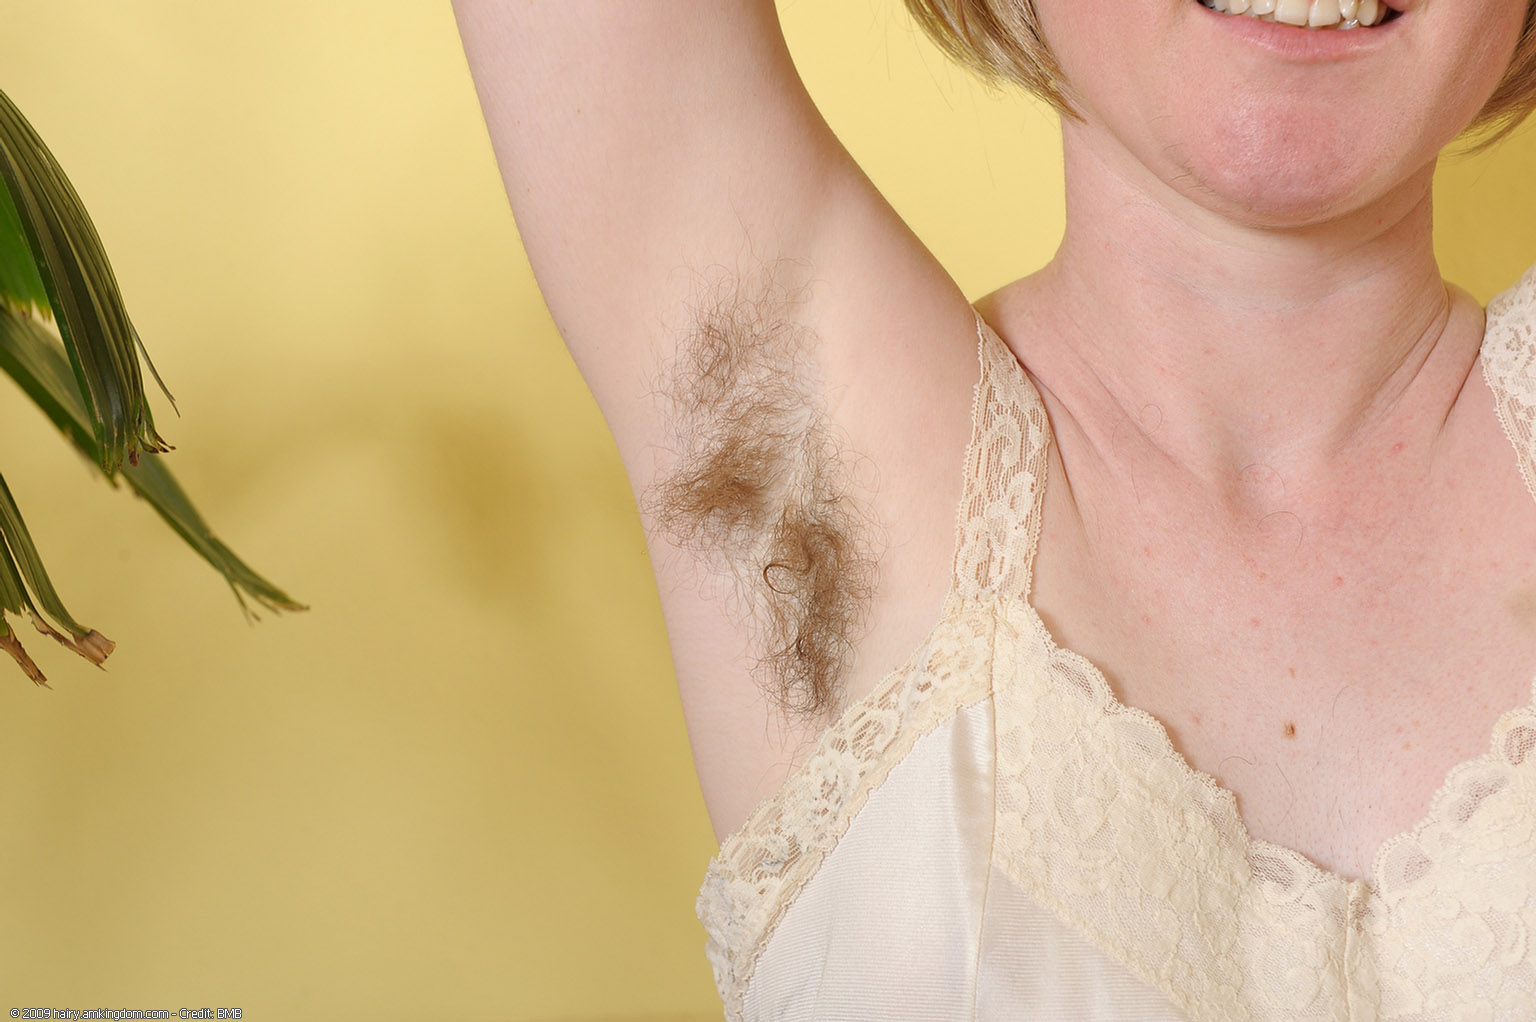 Alicia Atk Natural Hairy « ATK Natural And Hairy « Free ATK Pictures @ Bravo ATK